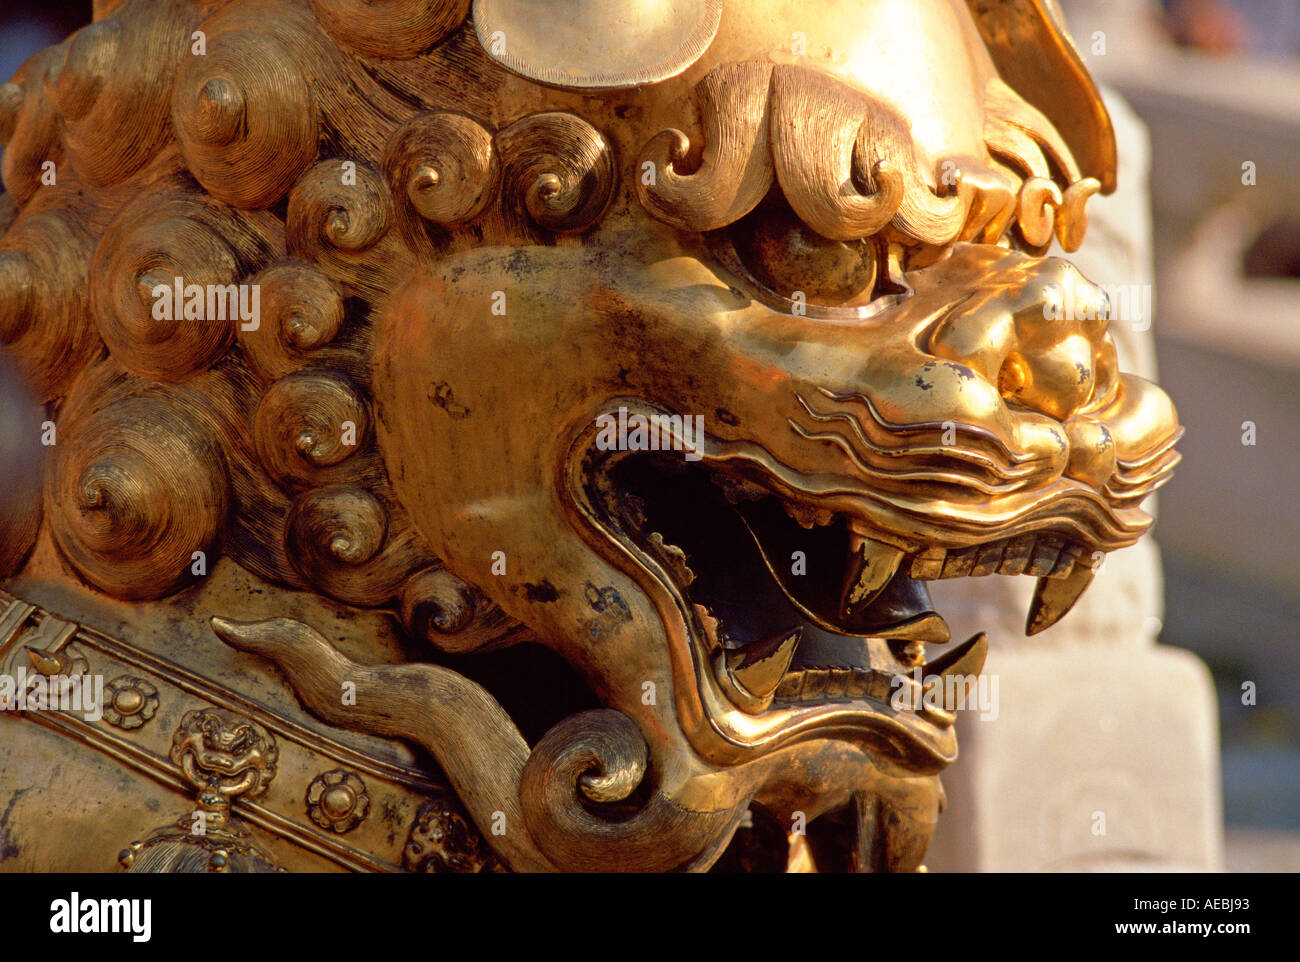 Chinese dragon statue in the Forbidden City Peking China Stock Photo